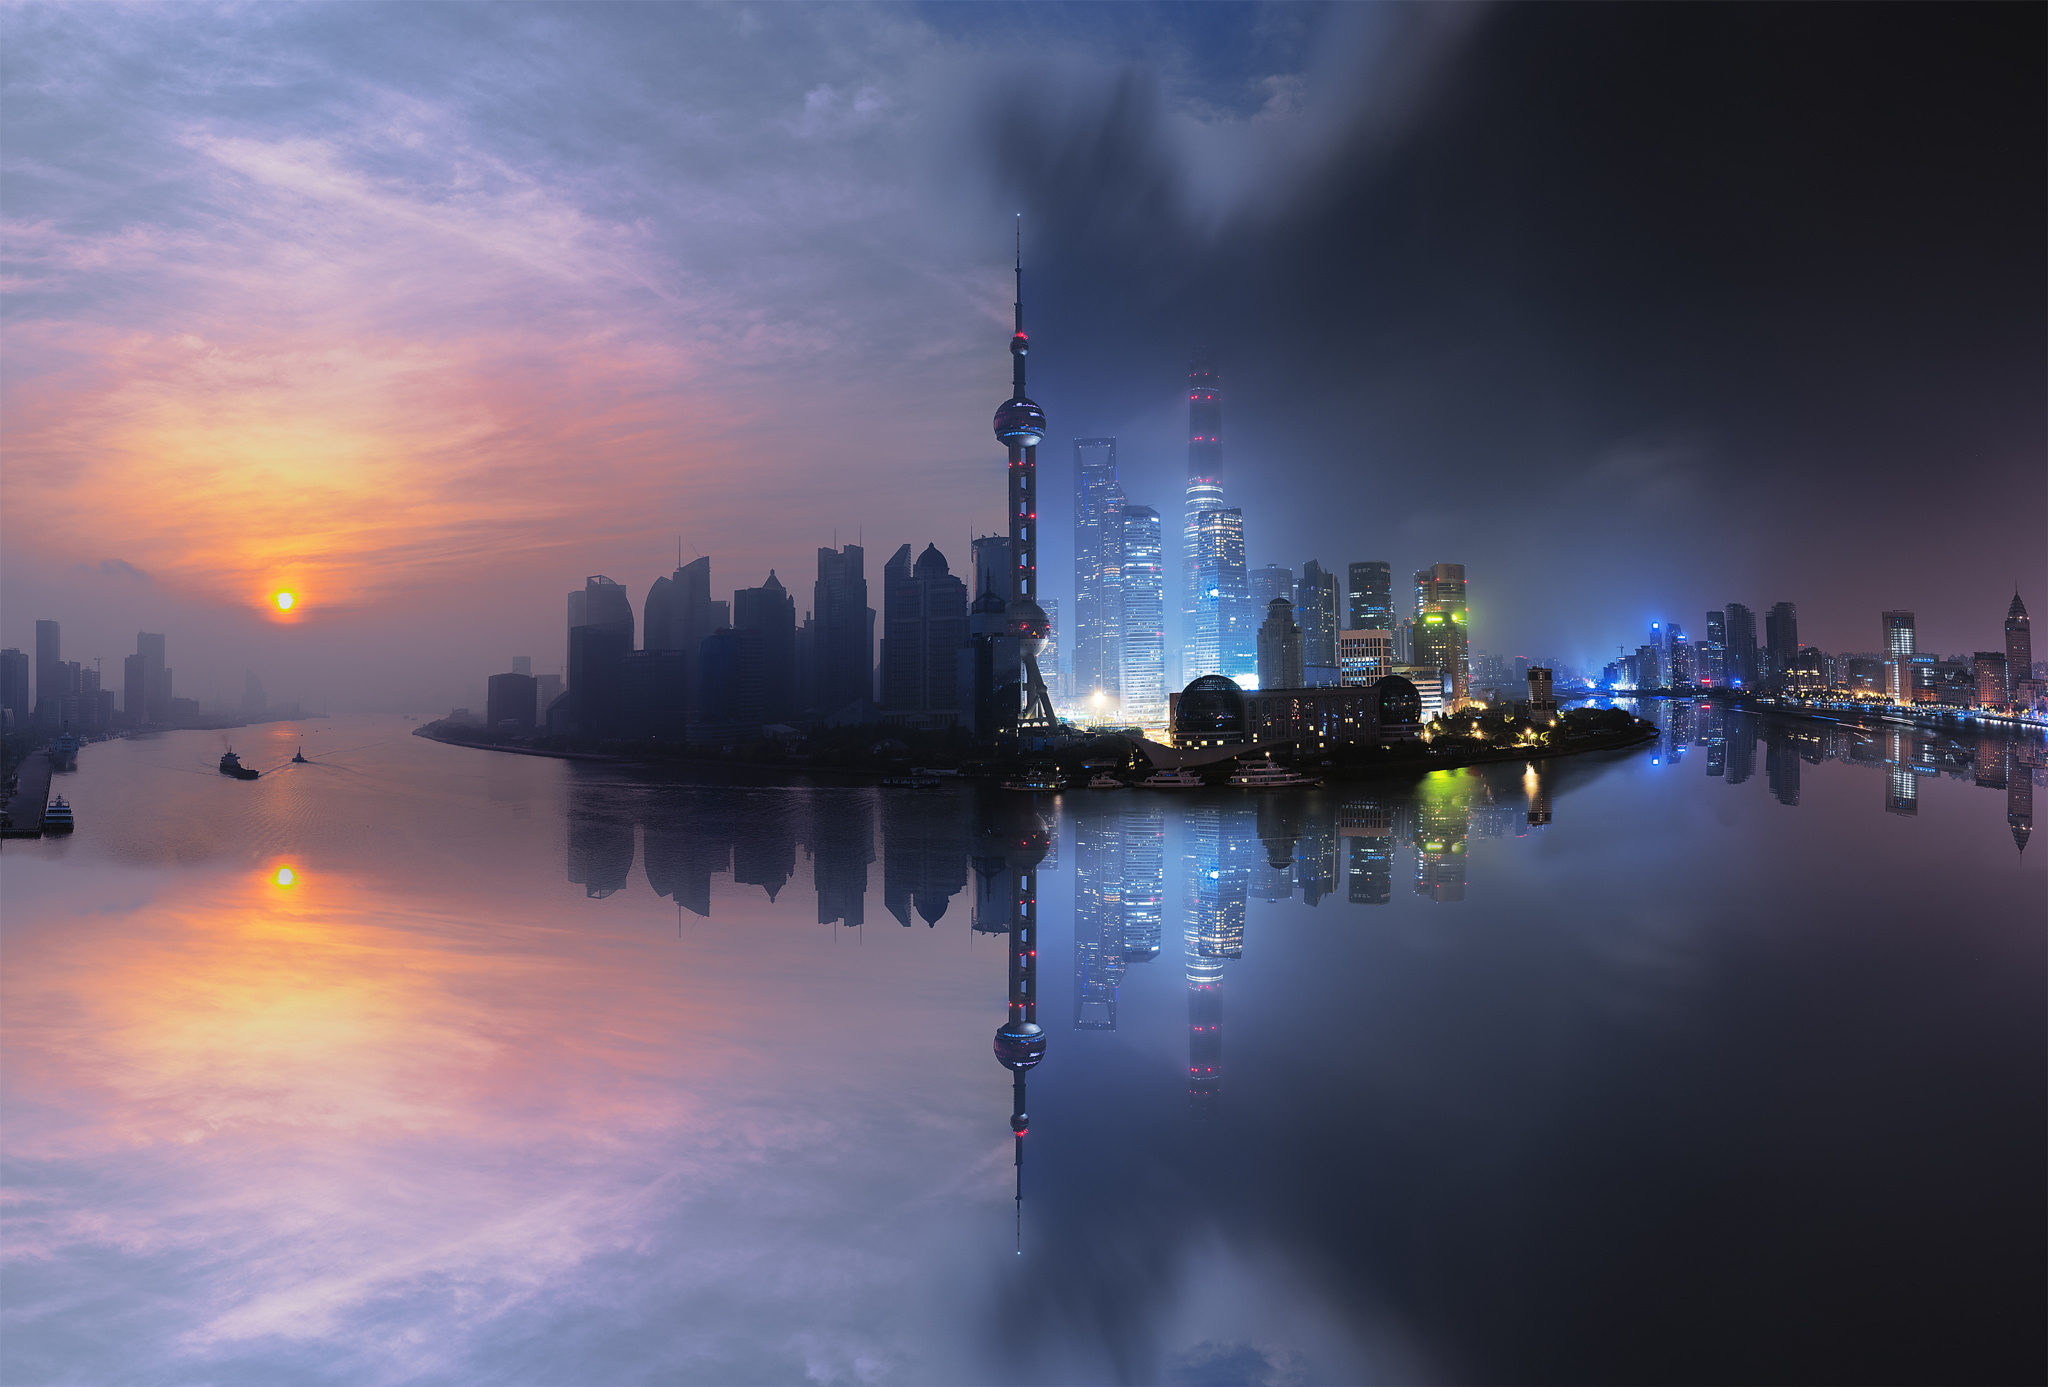 Shanghai, Night, Mist, China, Cityscape, Building, Clouds, Nightscape, Reflection, River, Sky, City Wallpaper